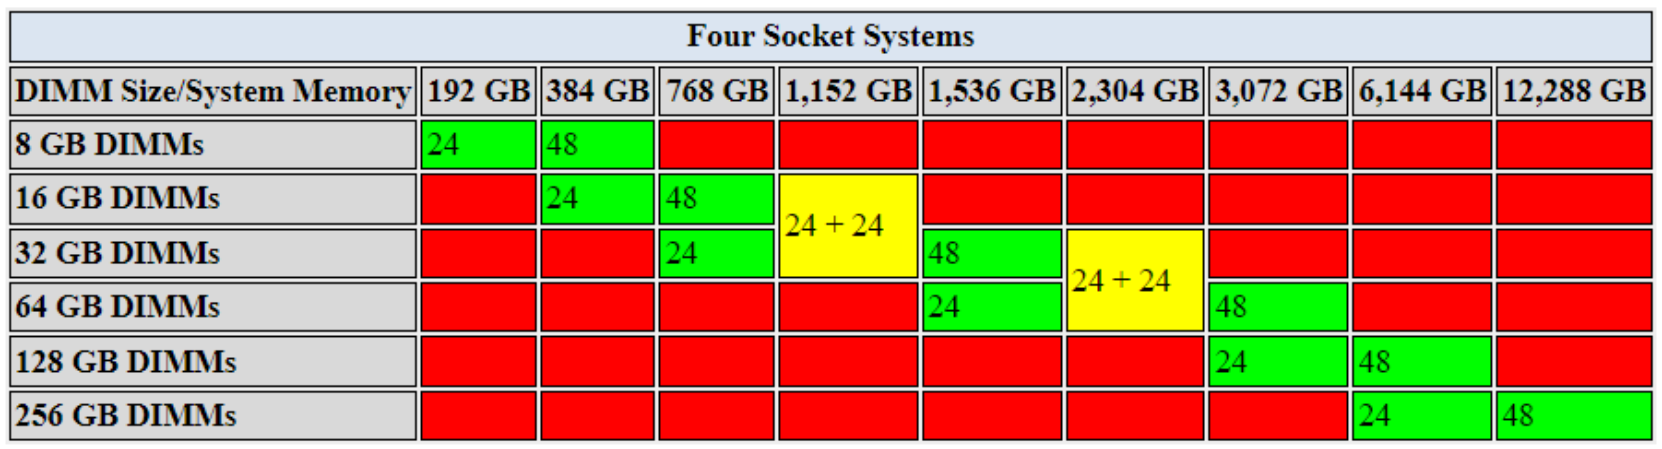 Table showing the supported DIMM/memory configurations for four-socket 2nd Generation servers